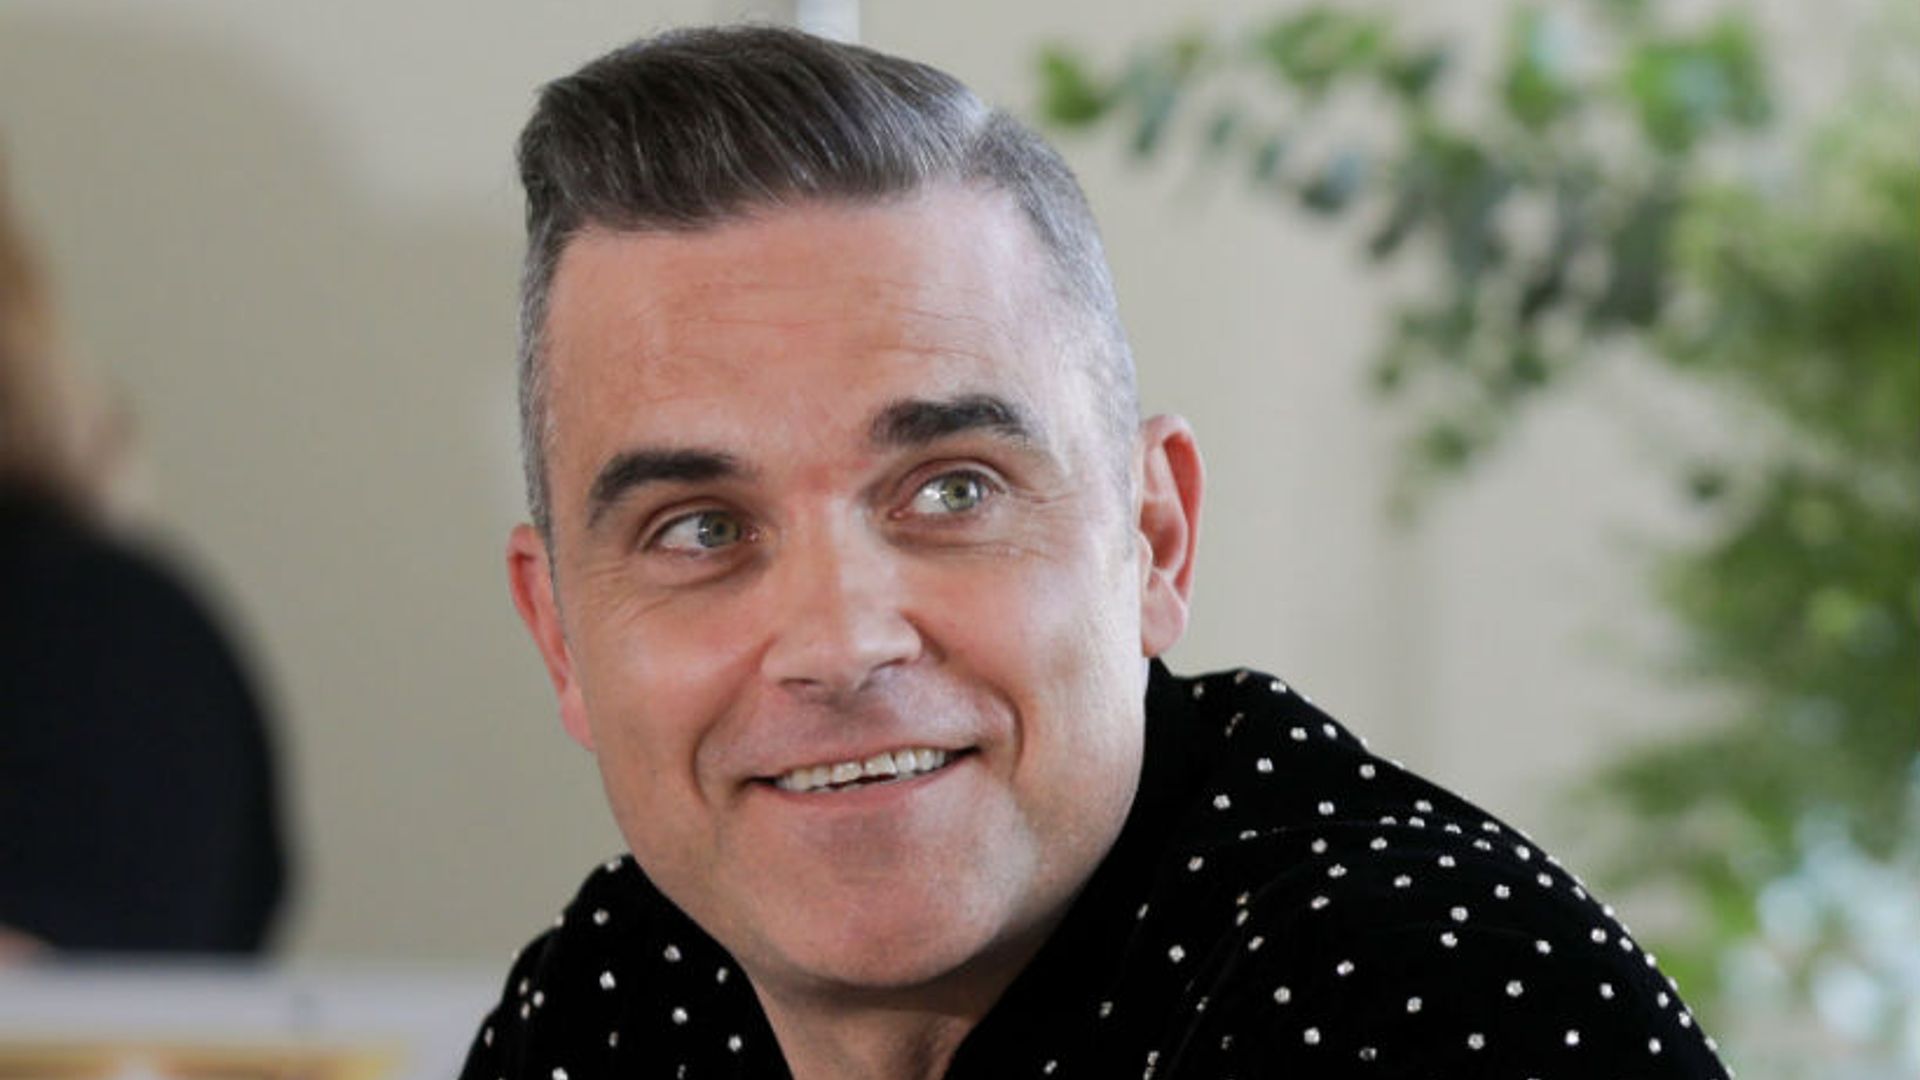 X Factor's new judge Robbie Williams hints his children will appear on the show